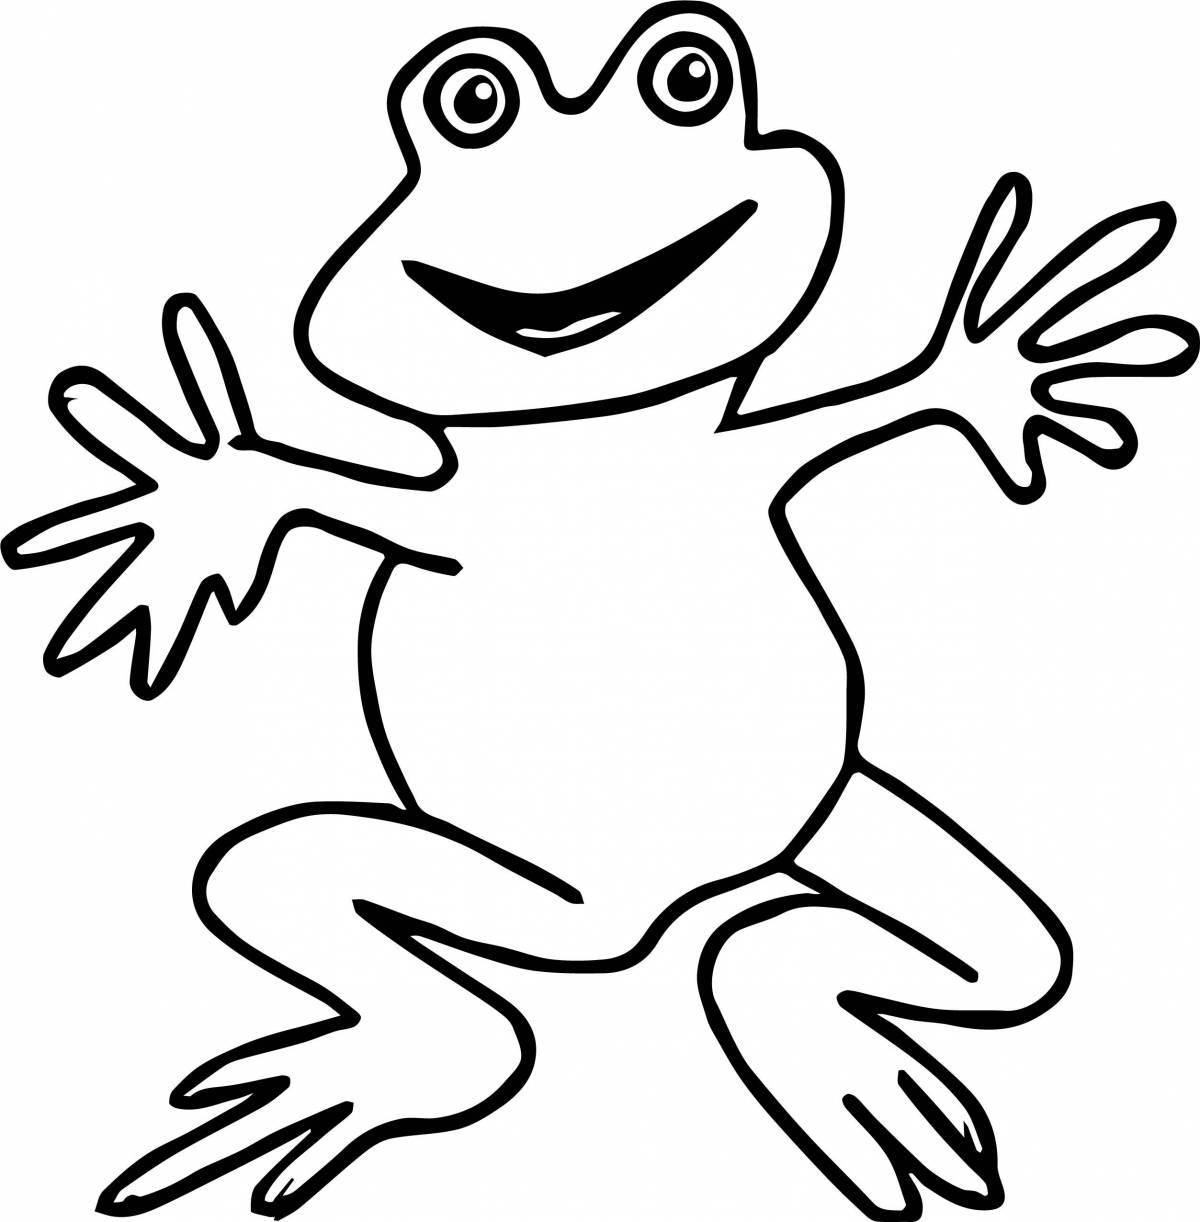 Coloring book gorgeous traveler frog